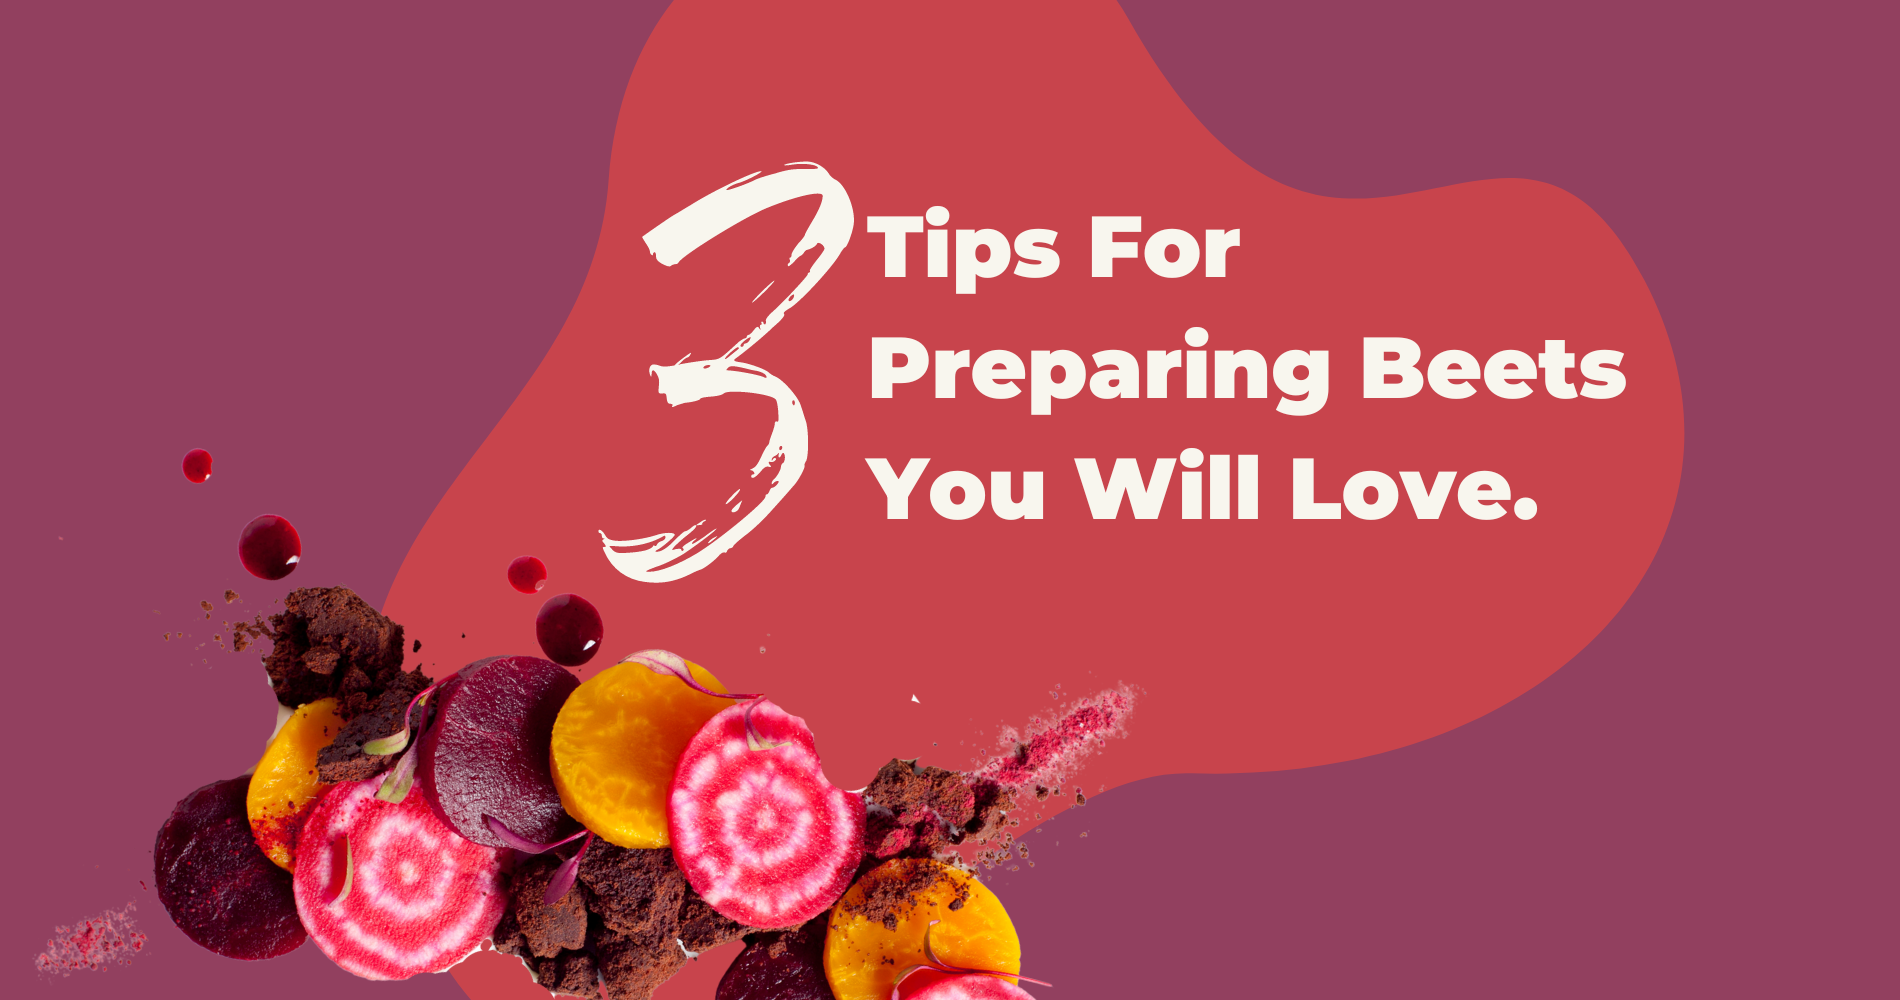 3 Tips For Preparing Beets That You Will Love image